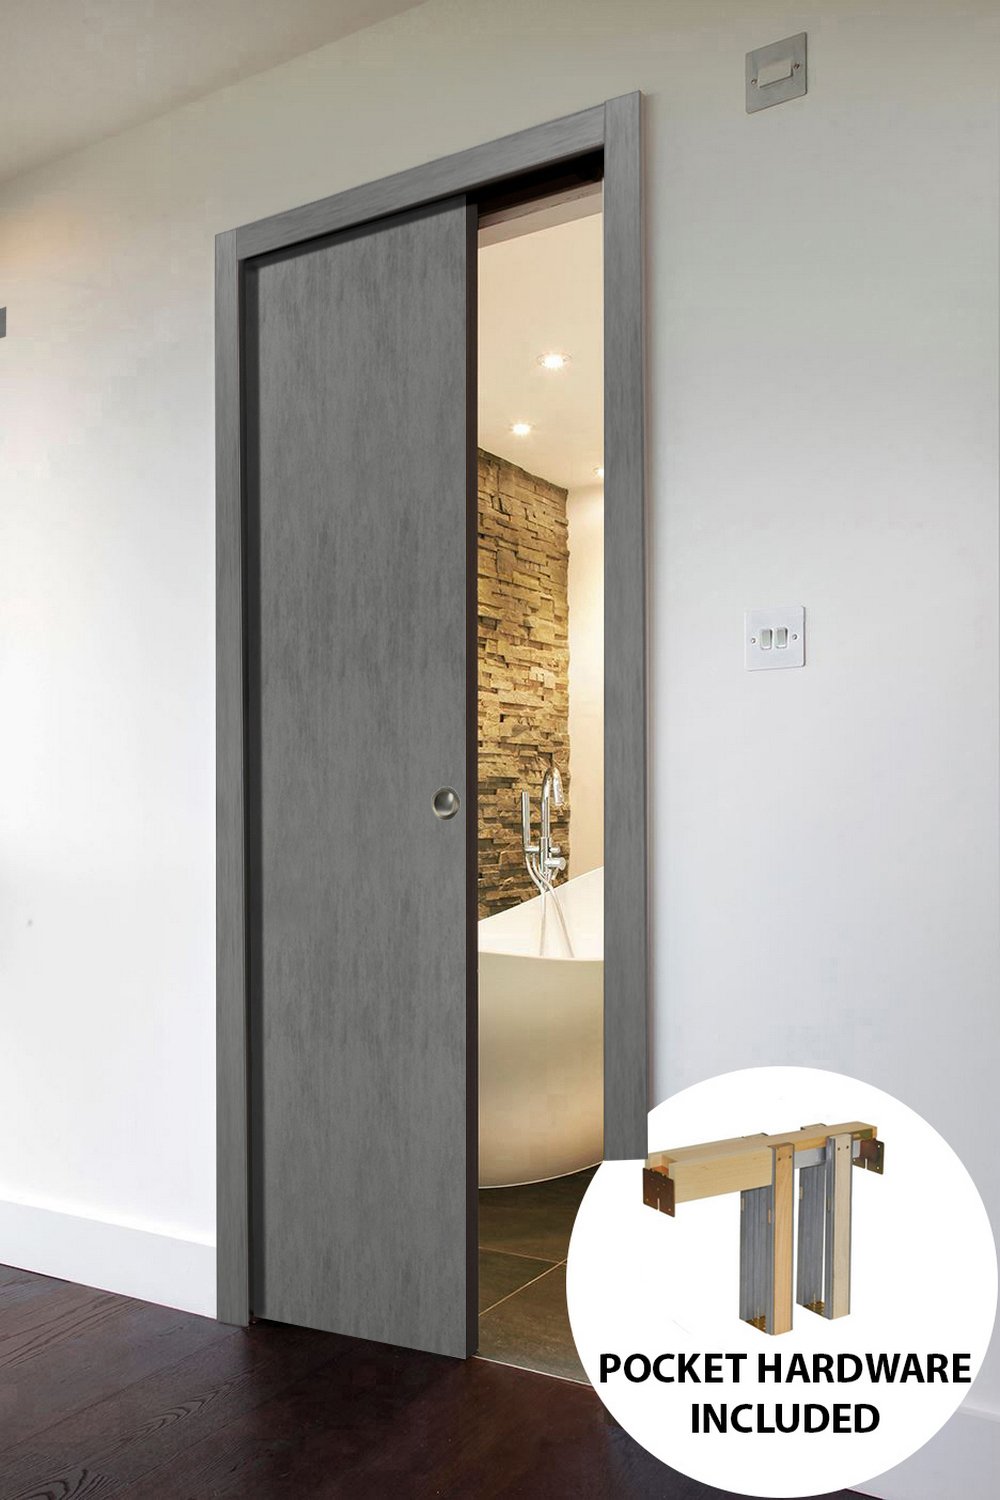 Sliding French Pocket Door 30 x 84 inches with | Planum 0010 Concrete | Kit Trims Rail Hardware | Solid Wood Interior Bedroom Sturdy Doors - image 2 of 3